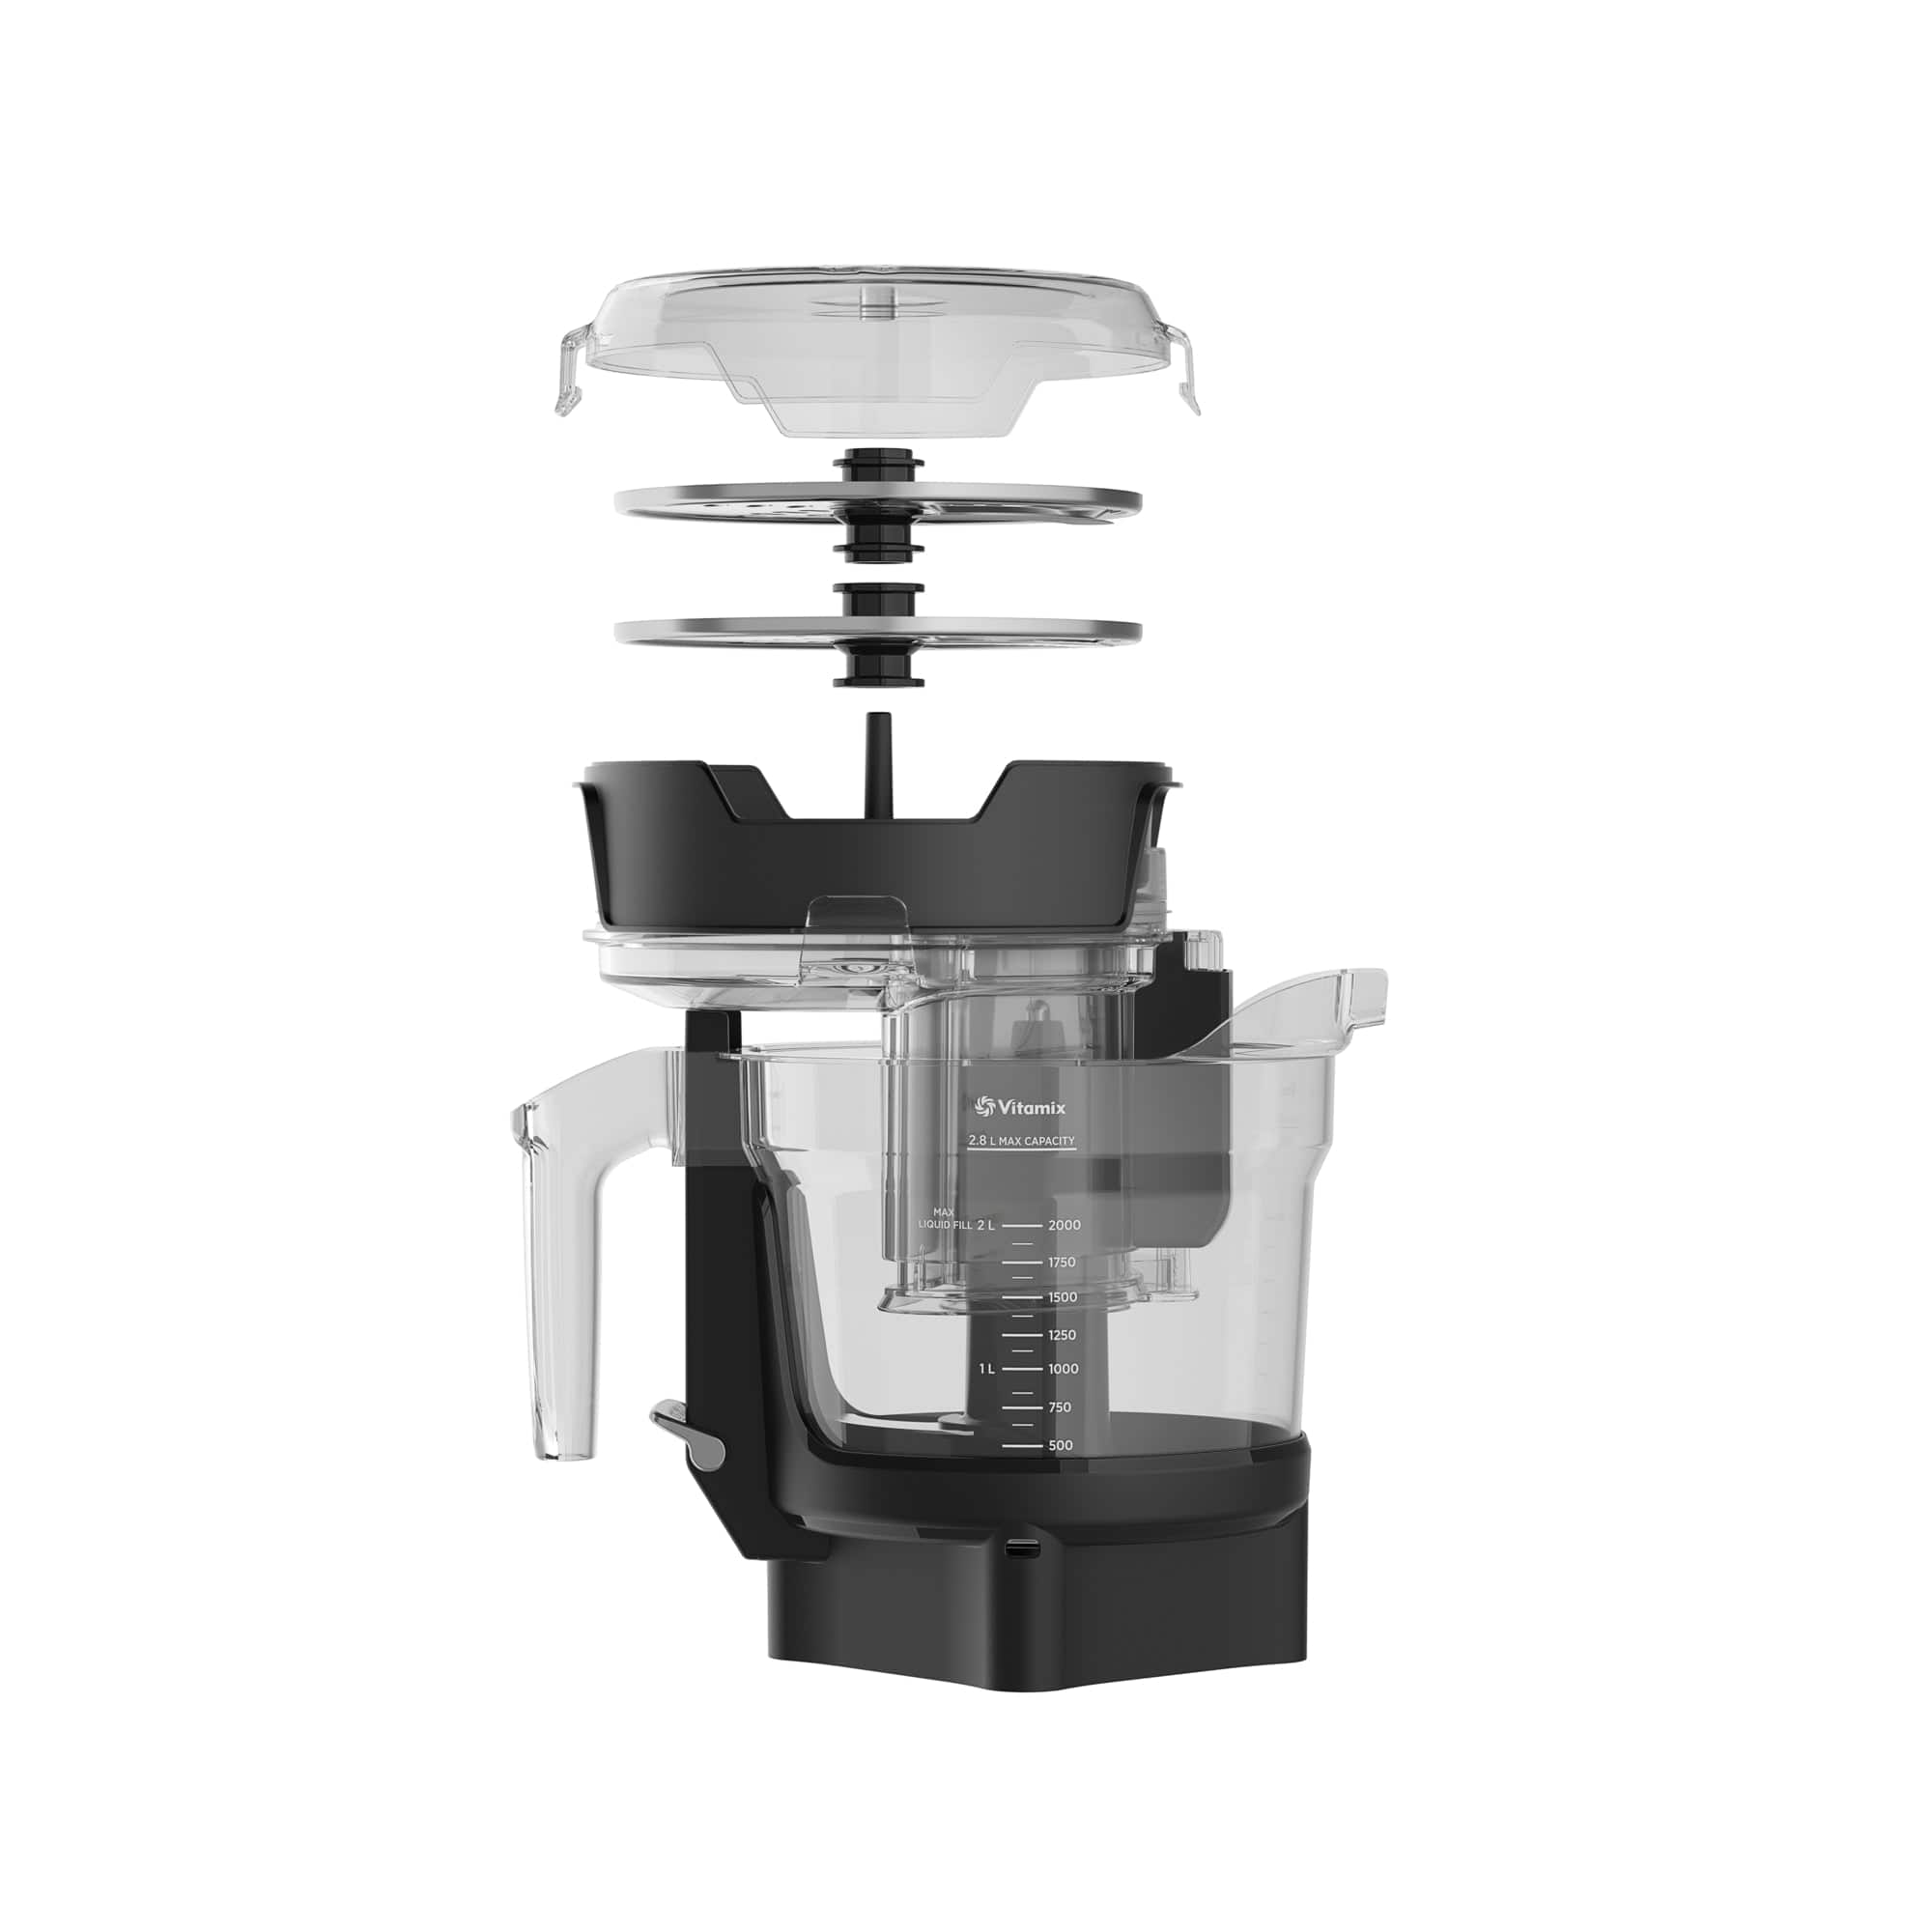 Vitamix ® A3500 Series Brushed Stainless Steel Blender with Food Processor Attachment